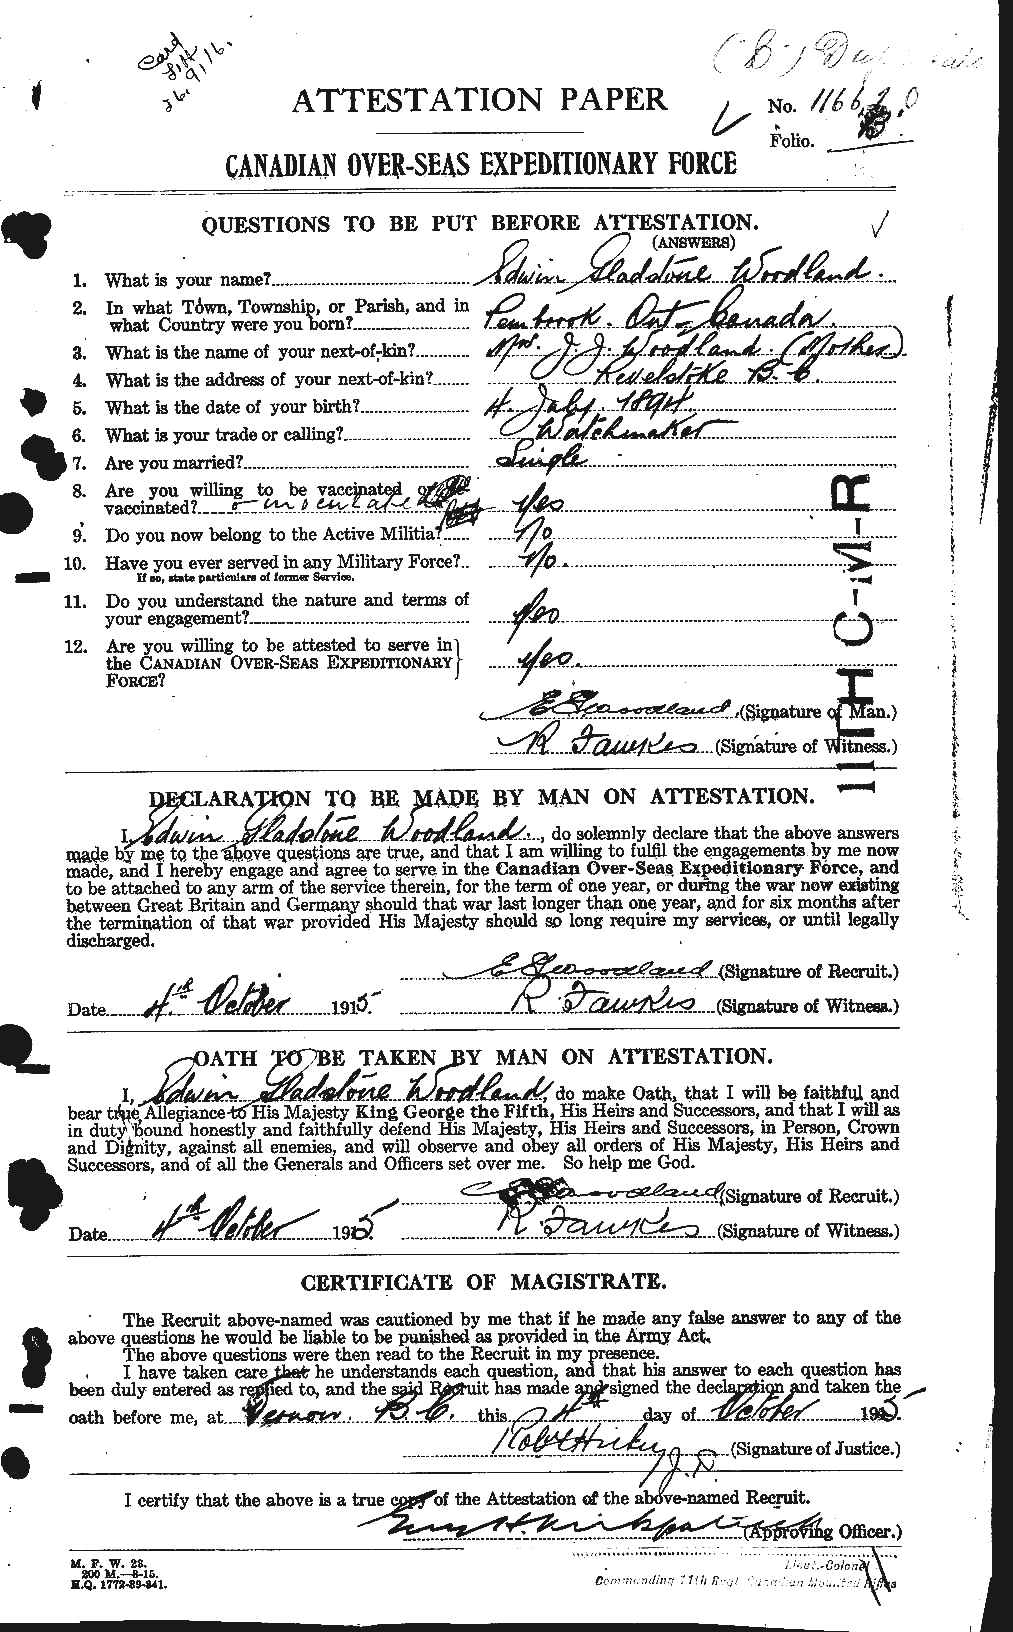 Personnel Records of the First World War - CEF 685458a